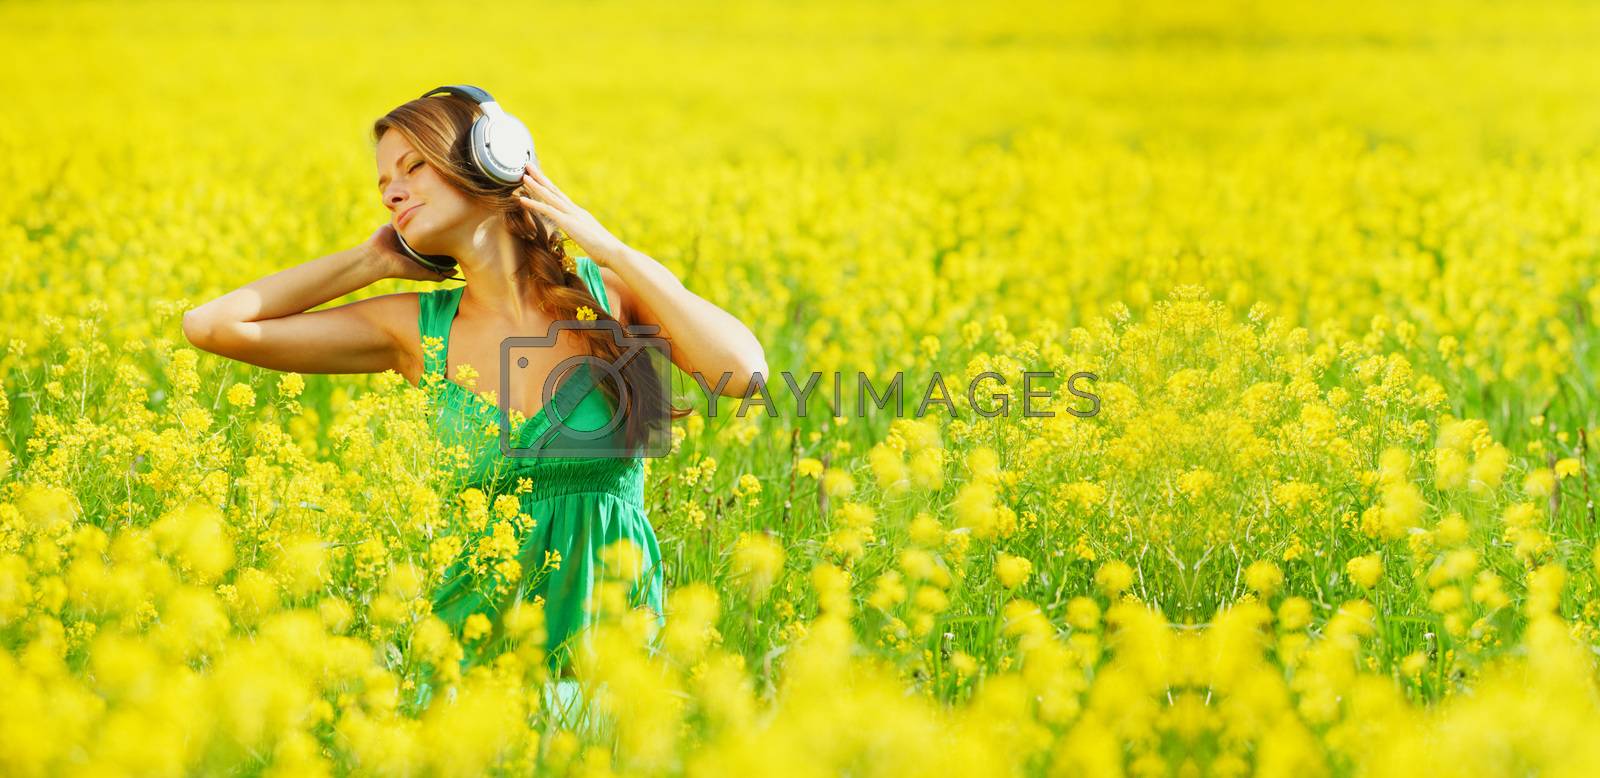 Royalty free image of listening to music by Yellowj